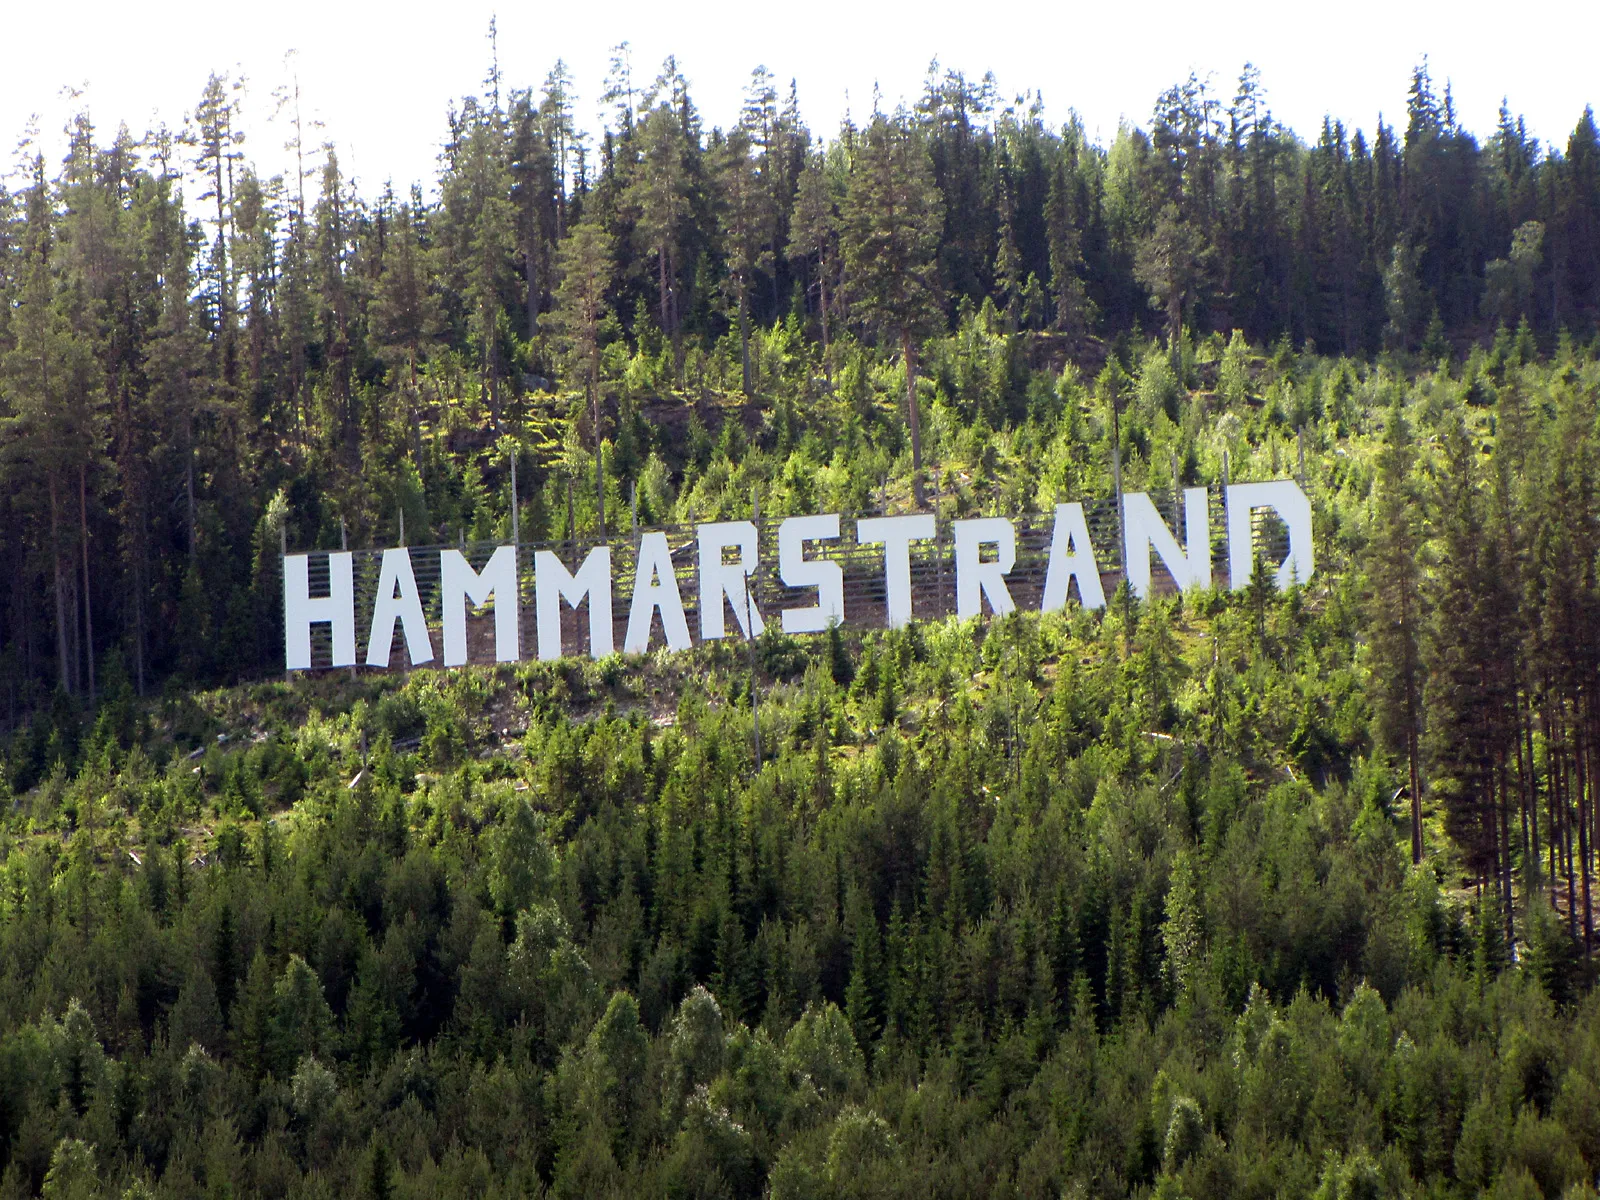 Photo showing: A "Hollywood style" sign in Hammarstrand in Ragunda Municipality, Sweden.